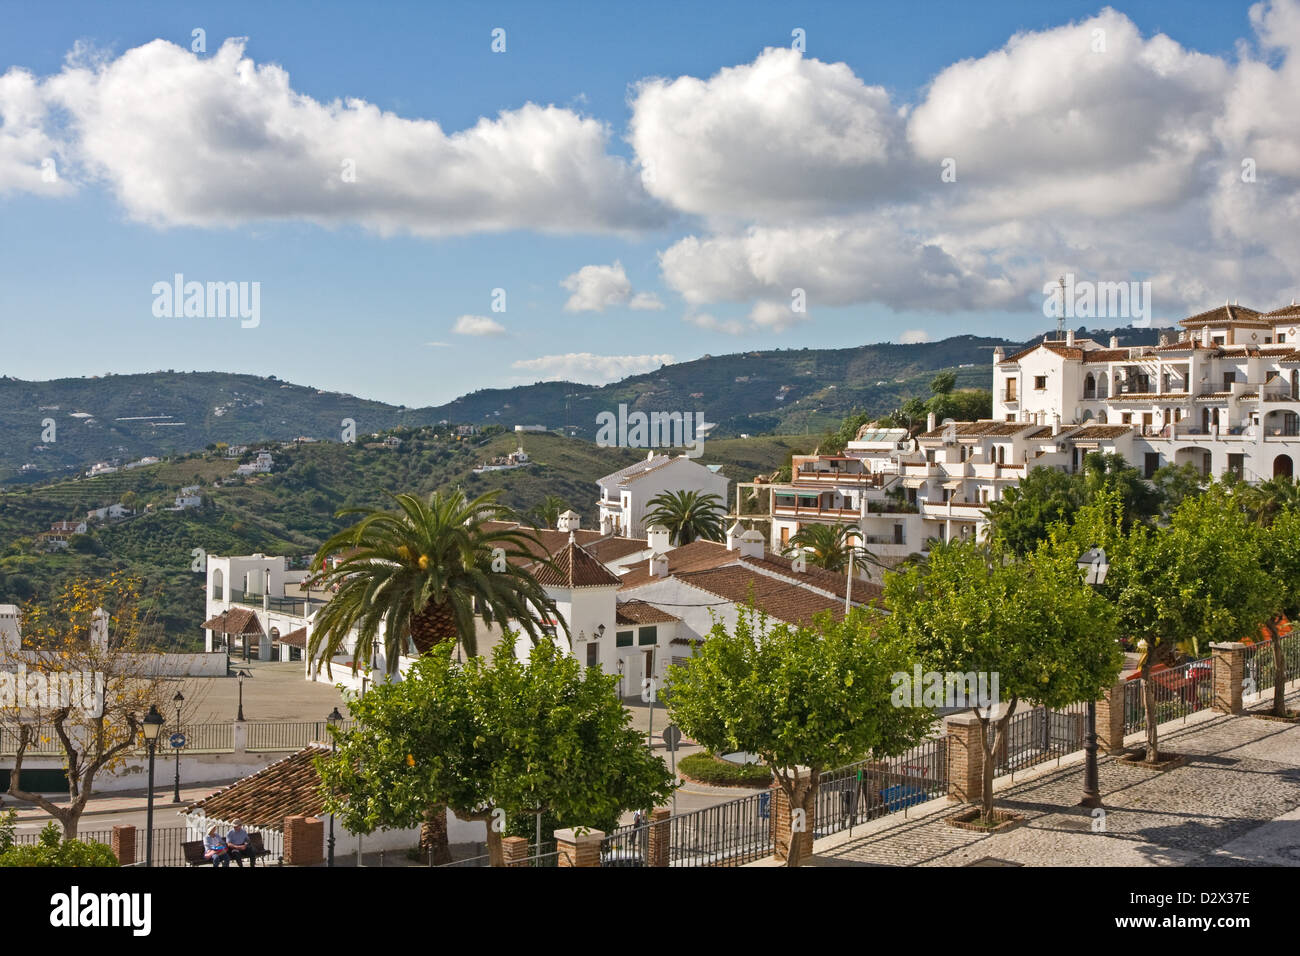 View of town square and village of Frigiliana, Nerja, Andalucia, Spain Stock Photo